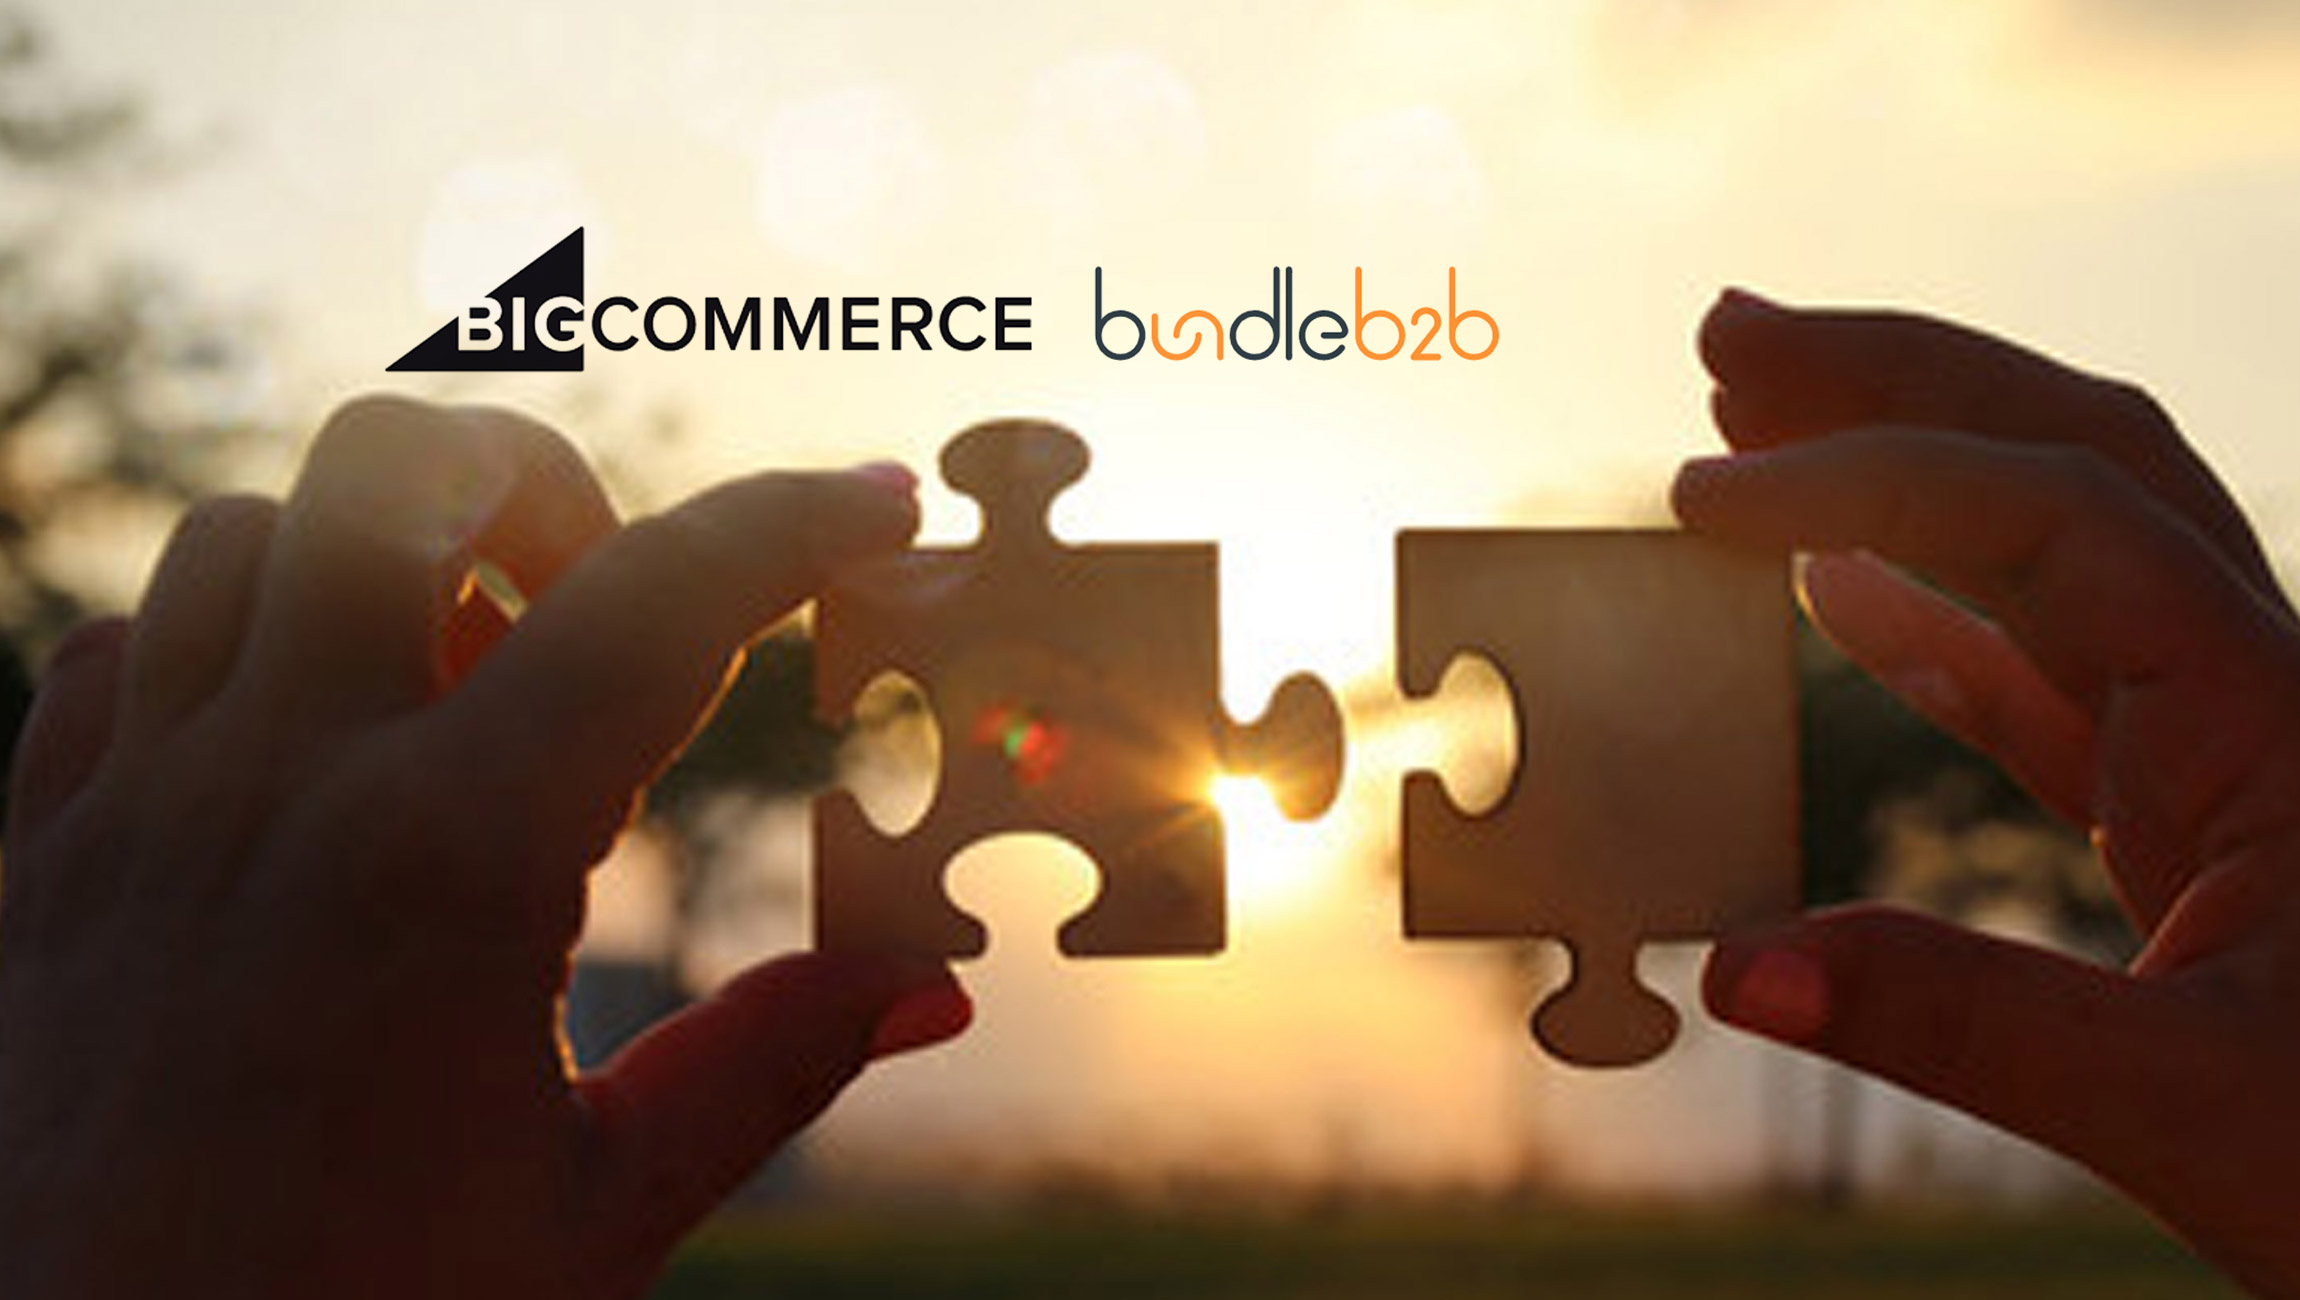 BigCommerce Further Invests in Becoming World’s Most Powerful B2B Ecommerce Platform with Acquisition of BundleB2B